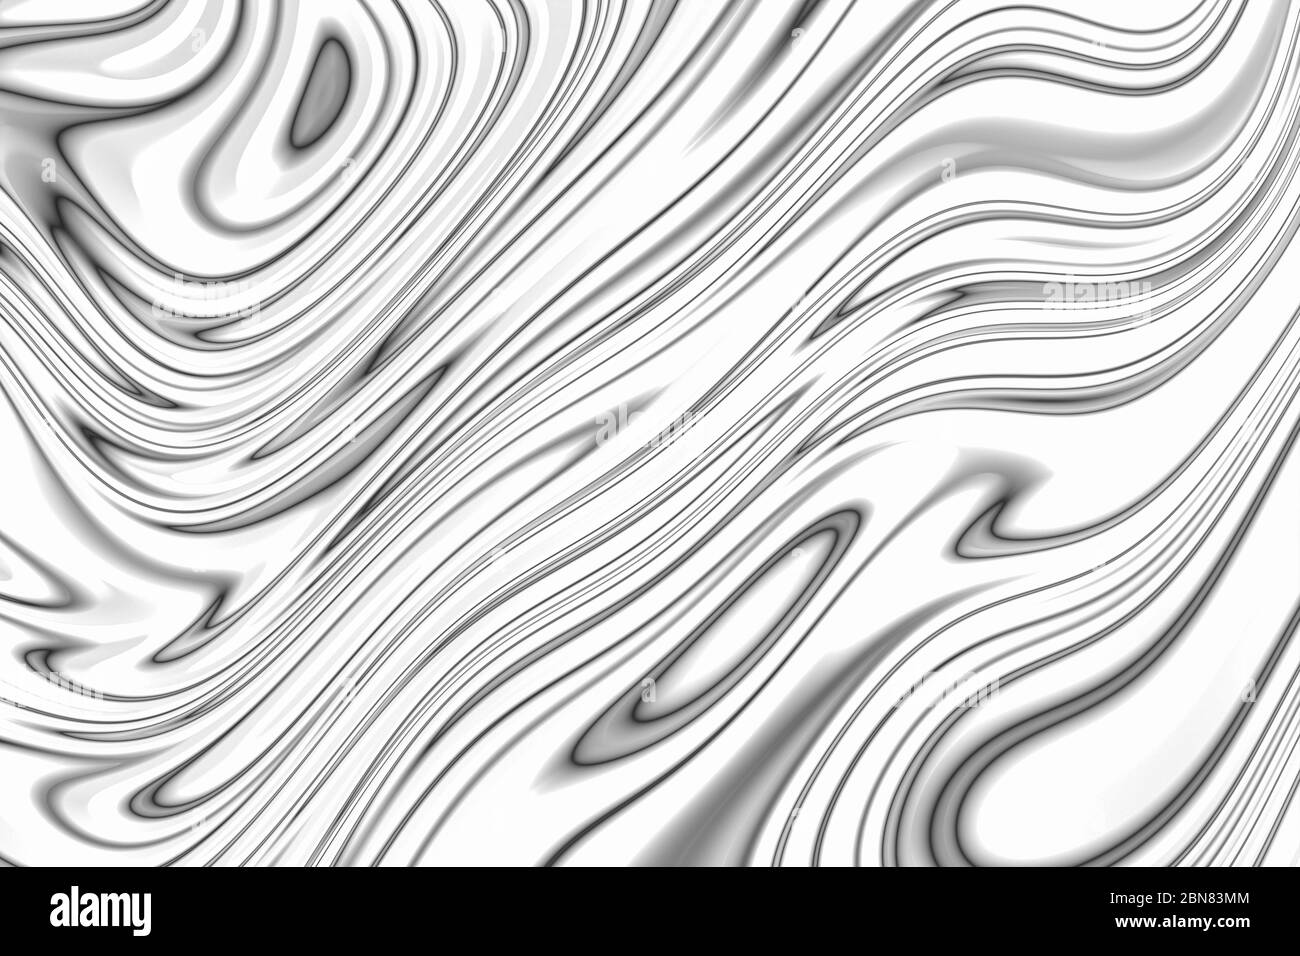 Black and white abstract acrylic marble pouring paint texture background for design artwork or decoration Stock Photo